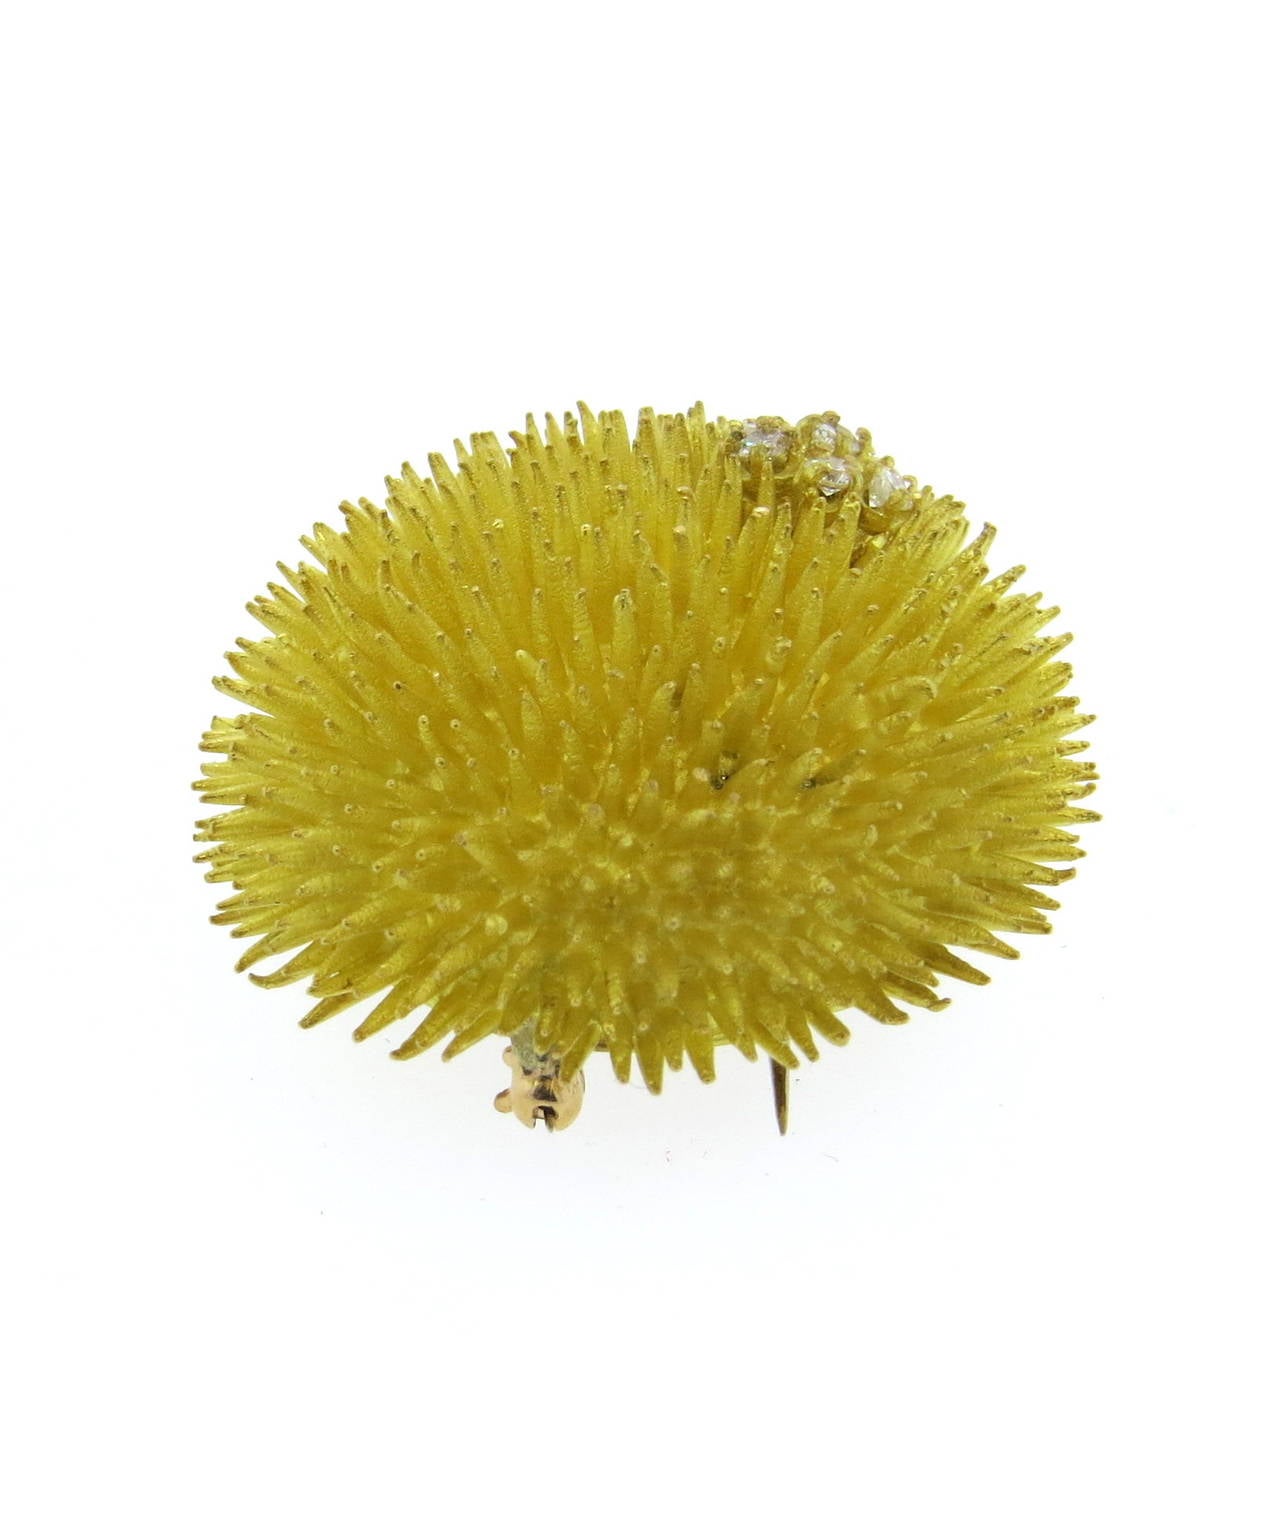 18k gold sea urchin brooch by Tiffany & Co, featuring diamond flower. Brooch is 35mm in diameter. Marked Tiffany & Co and 18k. weight - 42.8 grams